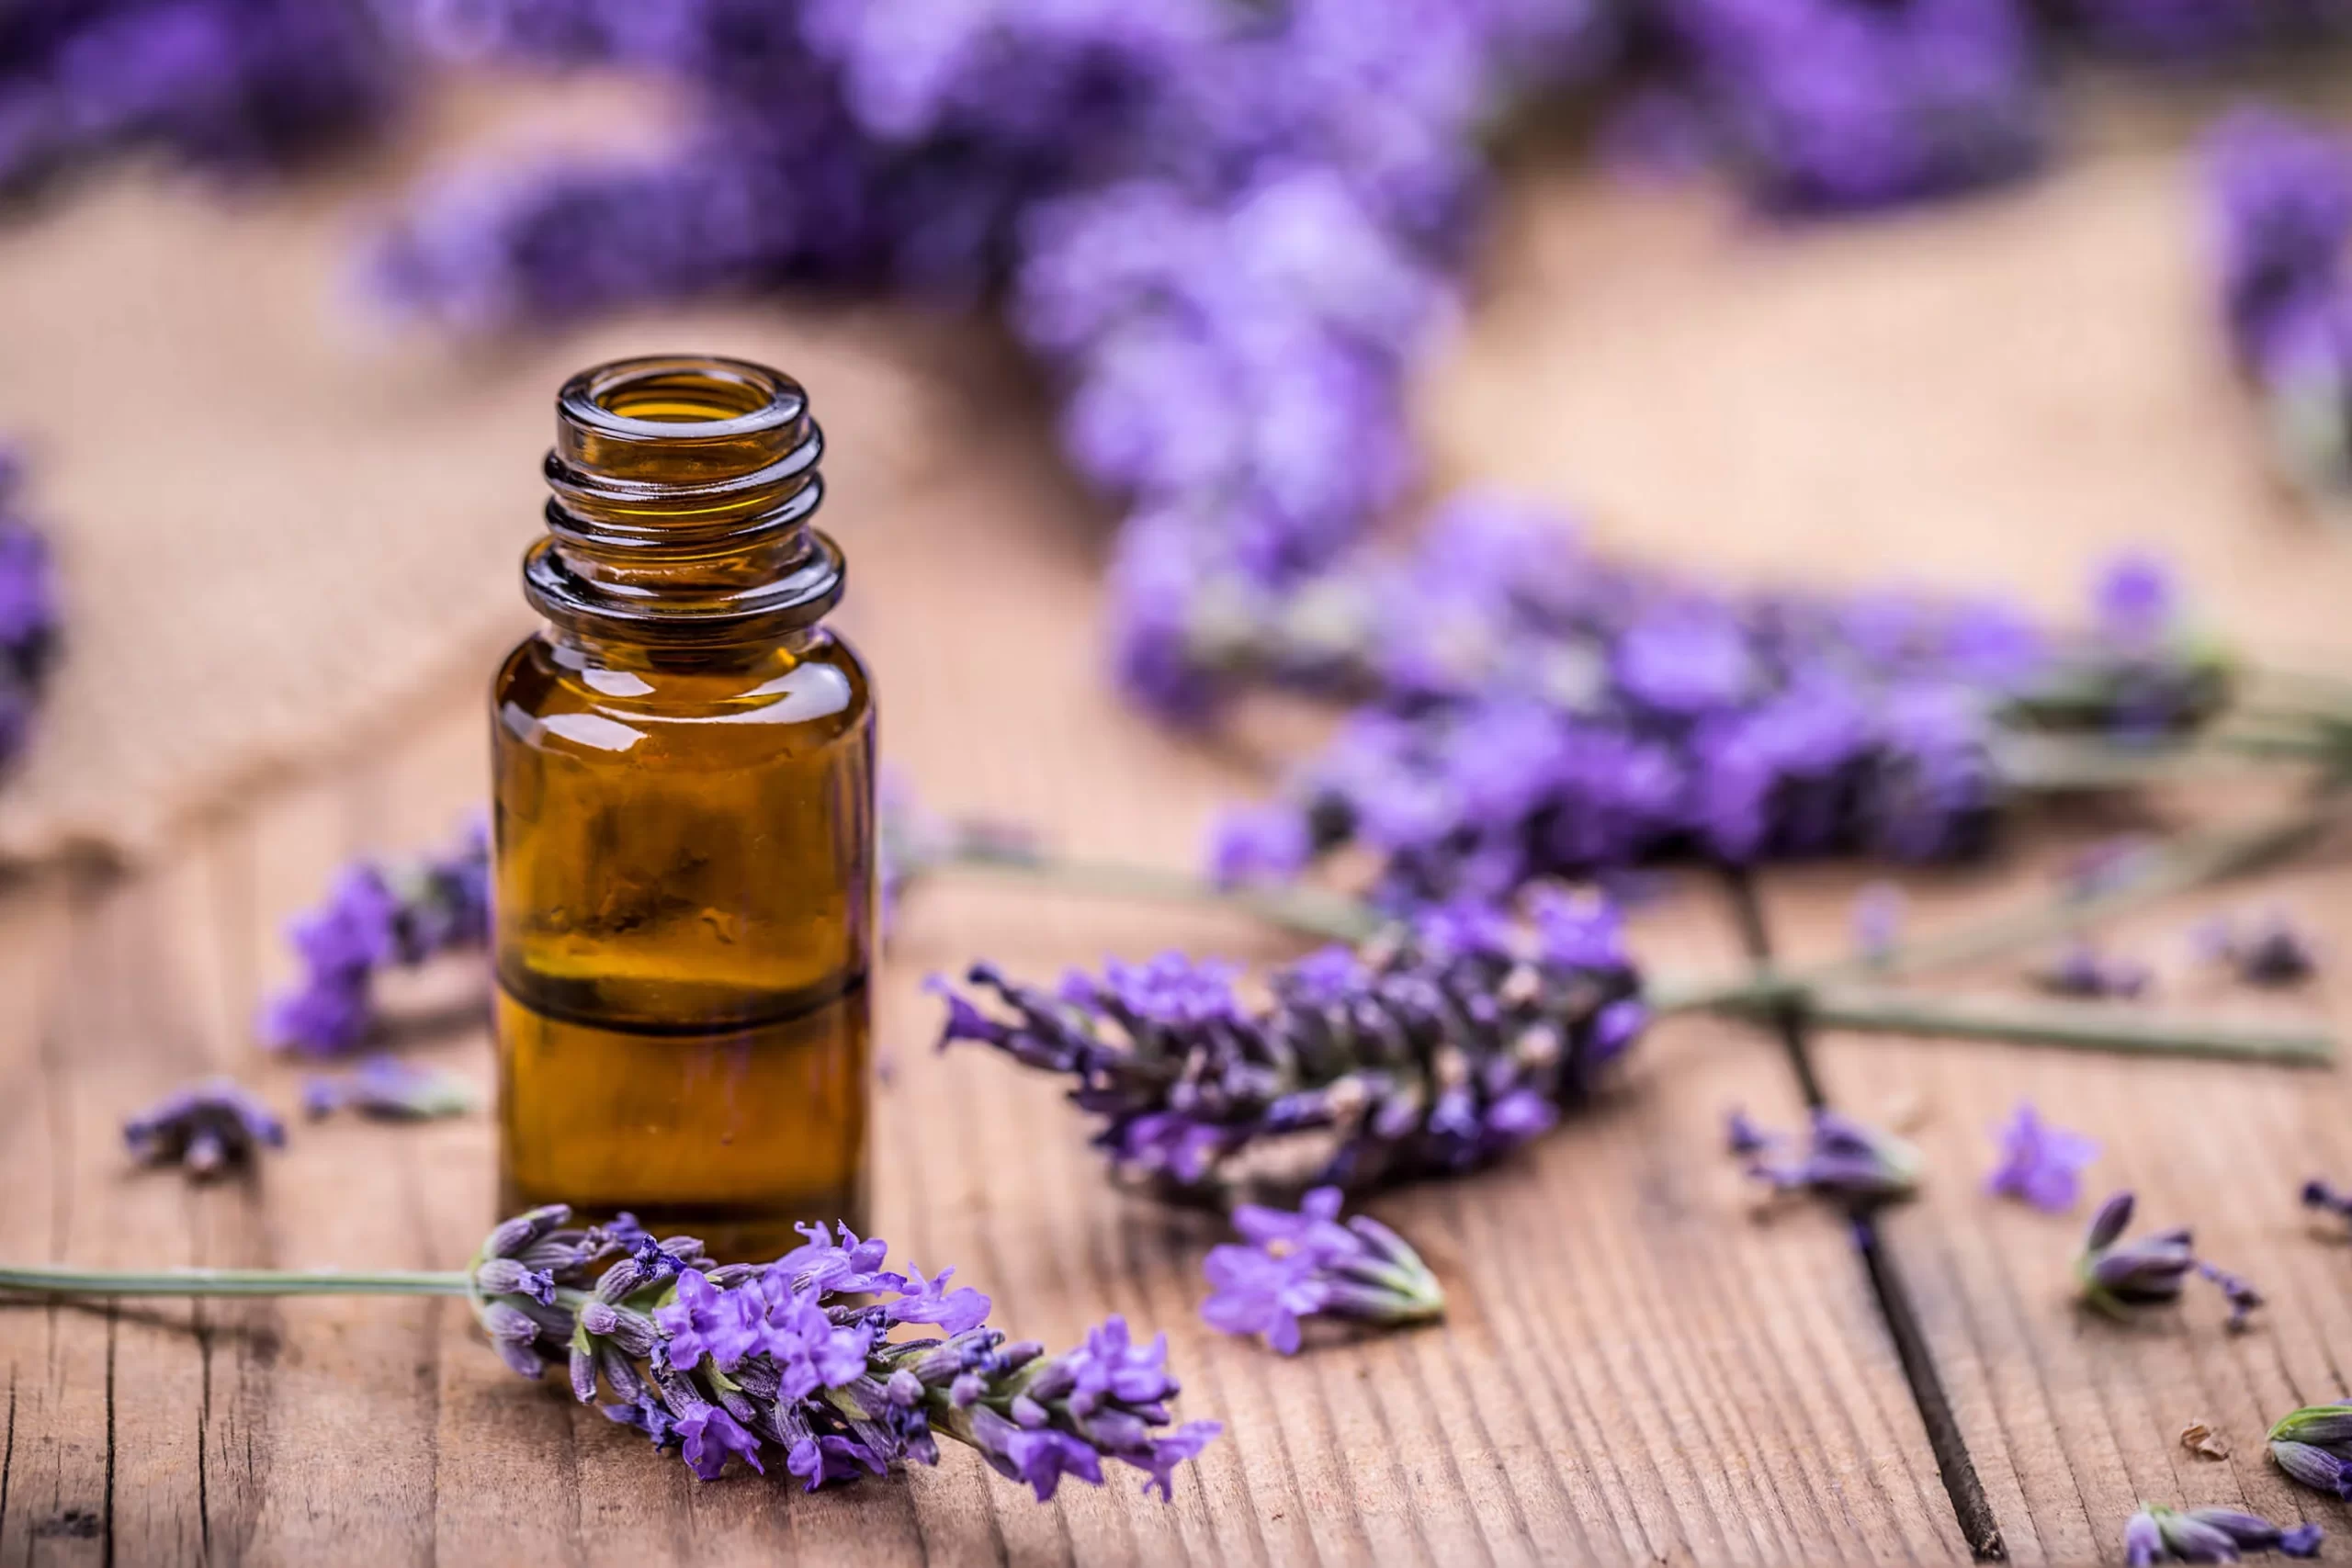 https://www.100percentpure.com/blogs/feed/6-reasons-to-use-lavender-oil-for-skin